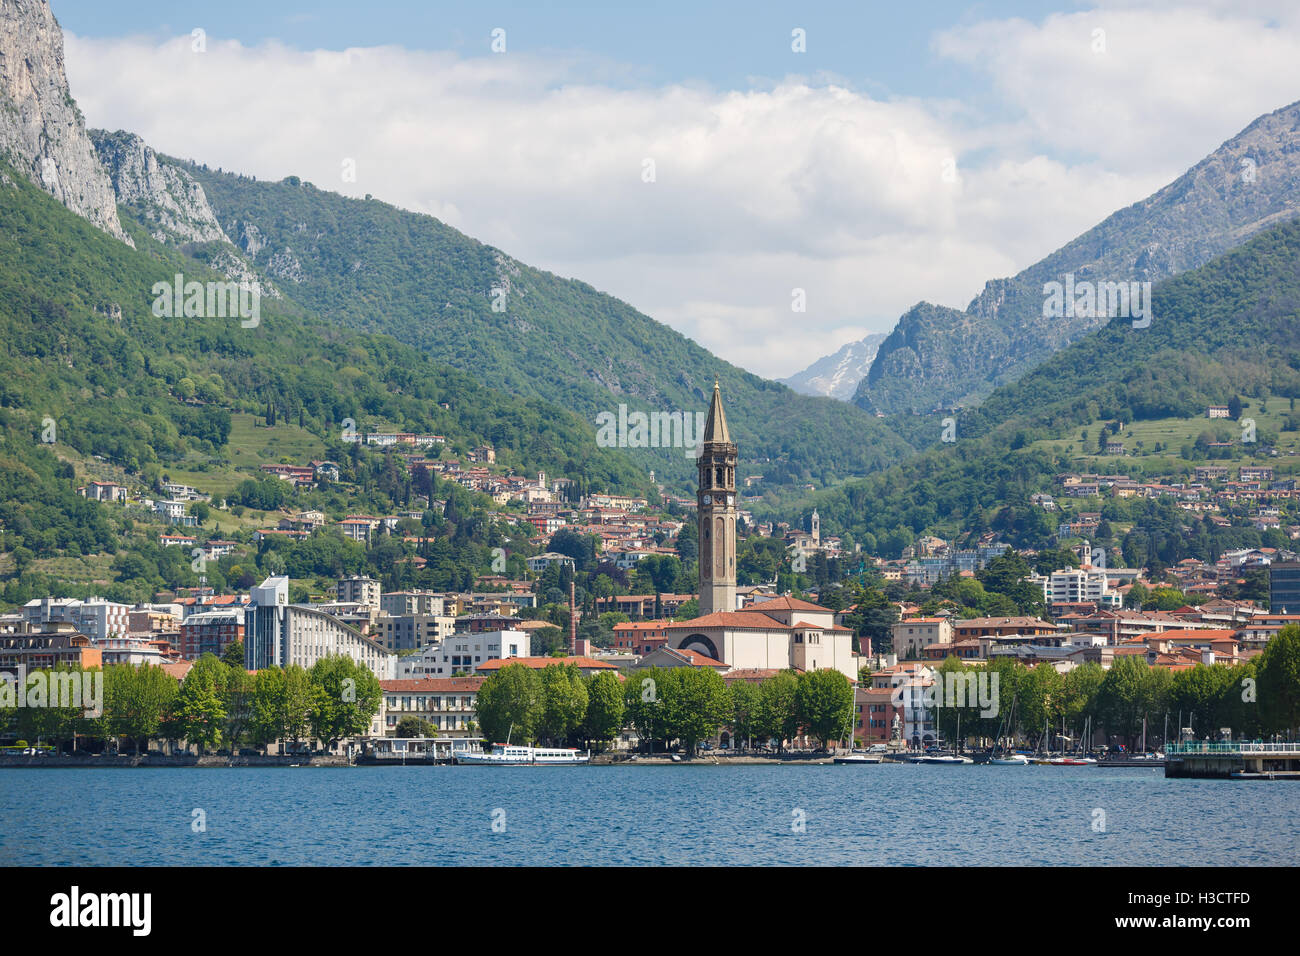 View of the cityscape of Lecco town on the coast of Lake Como, Italy Stock Photo